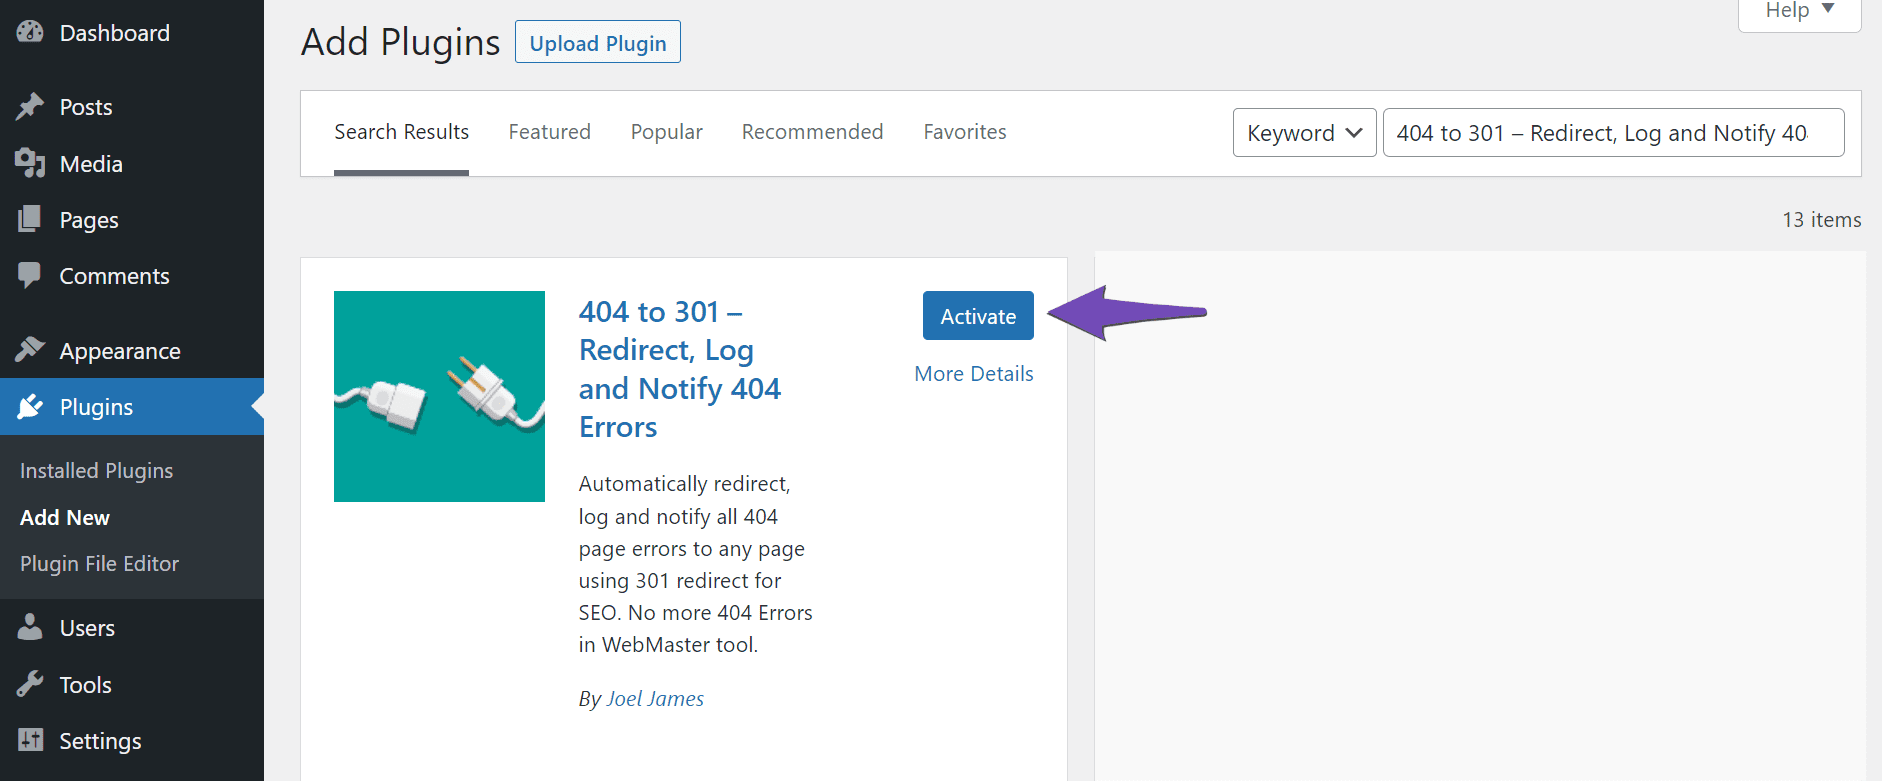 How to activate 404 to 301 - Redirect, Log and Notify 404 Errors